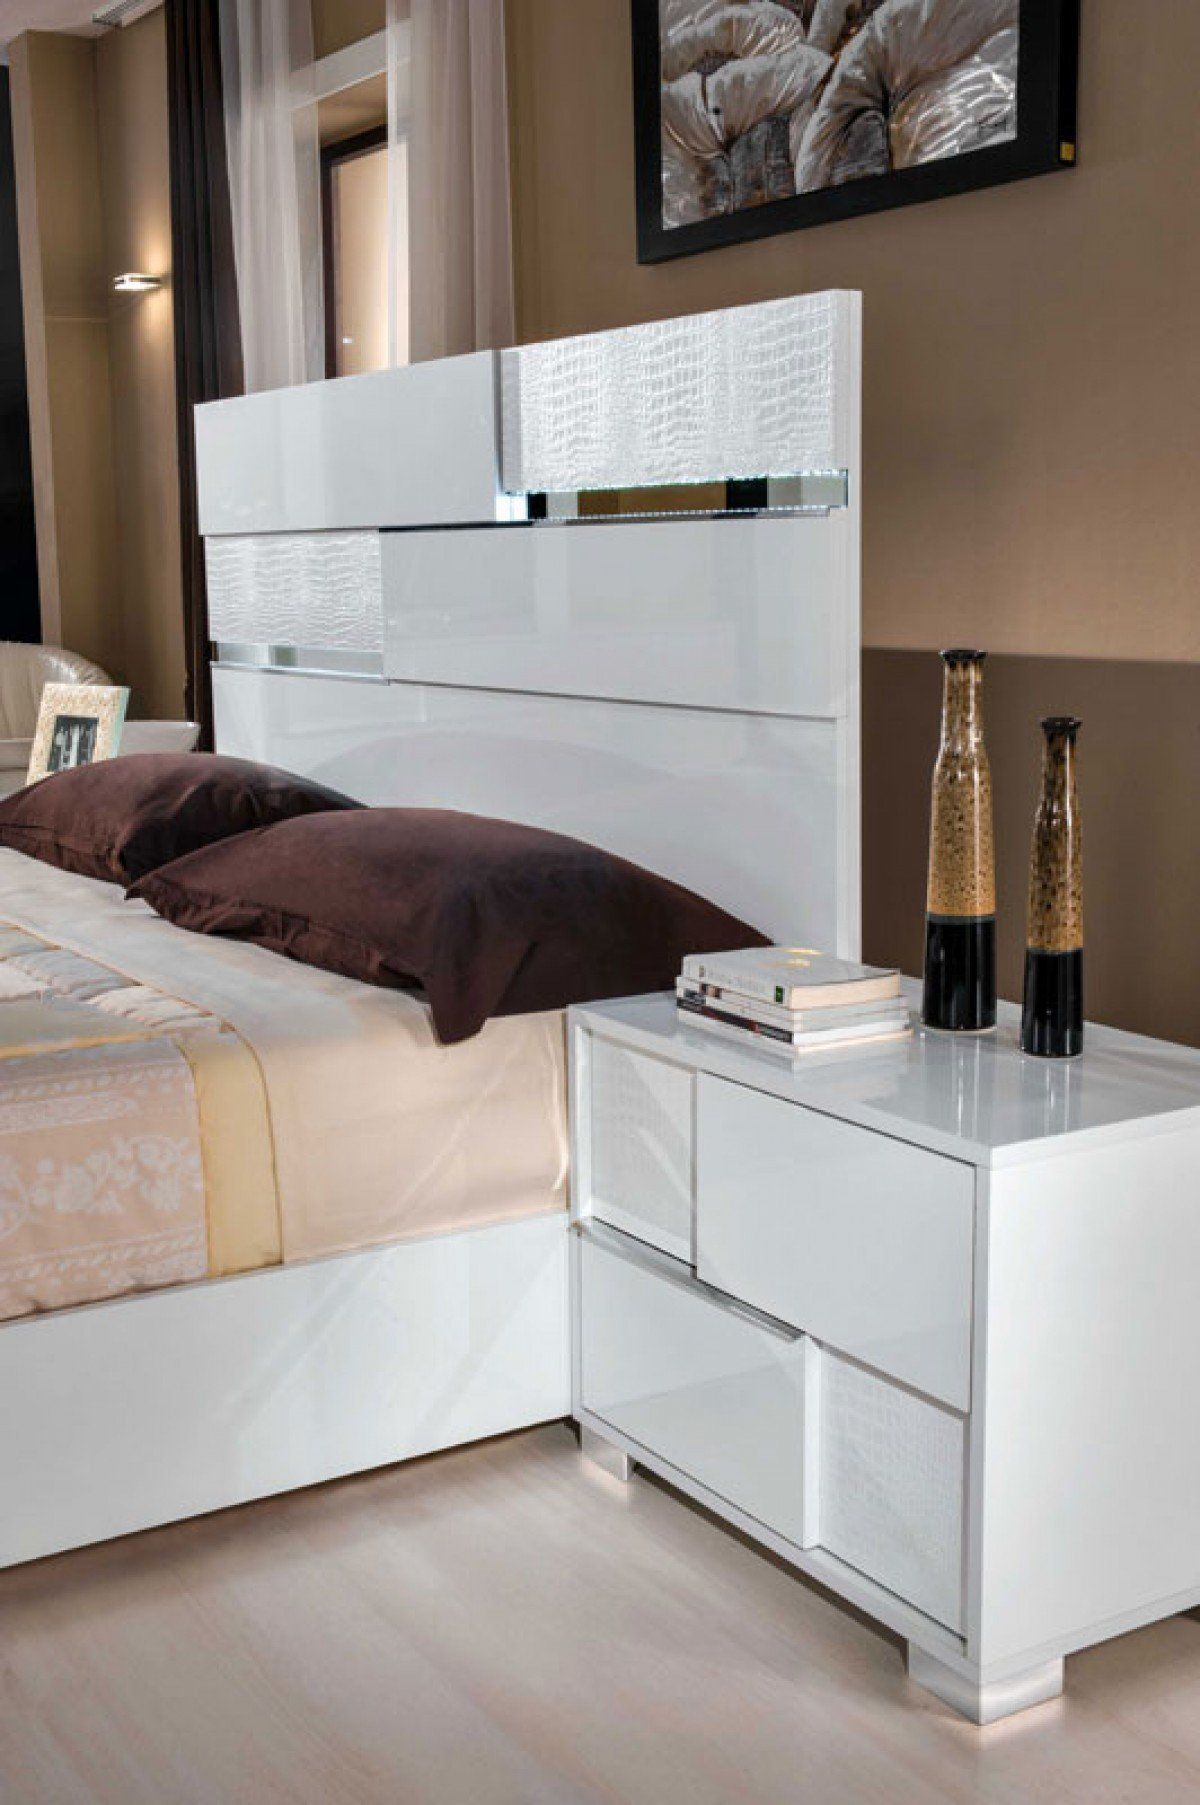 Sleek and Chic: Transform Your Bedroom with White High Gloss Furniture